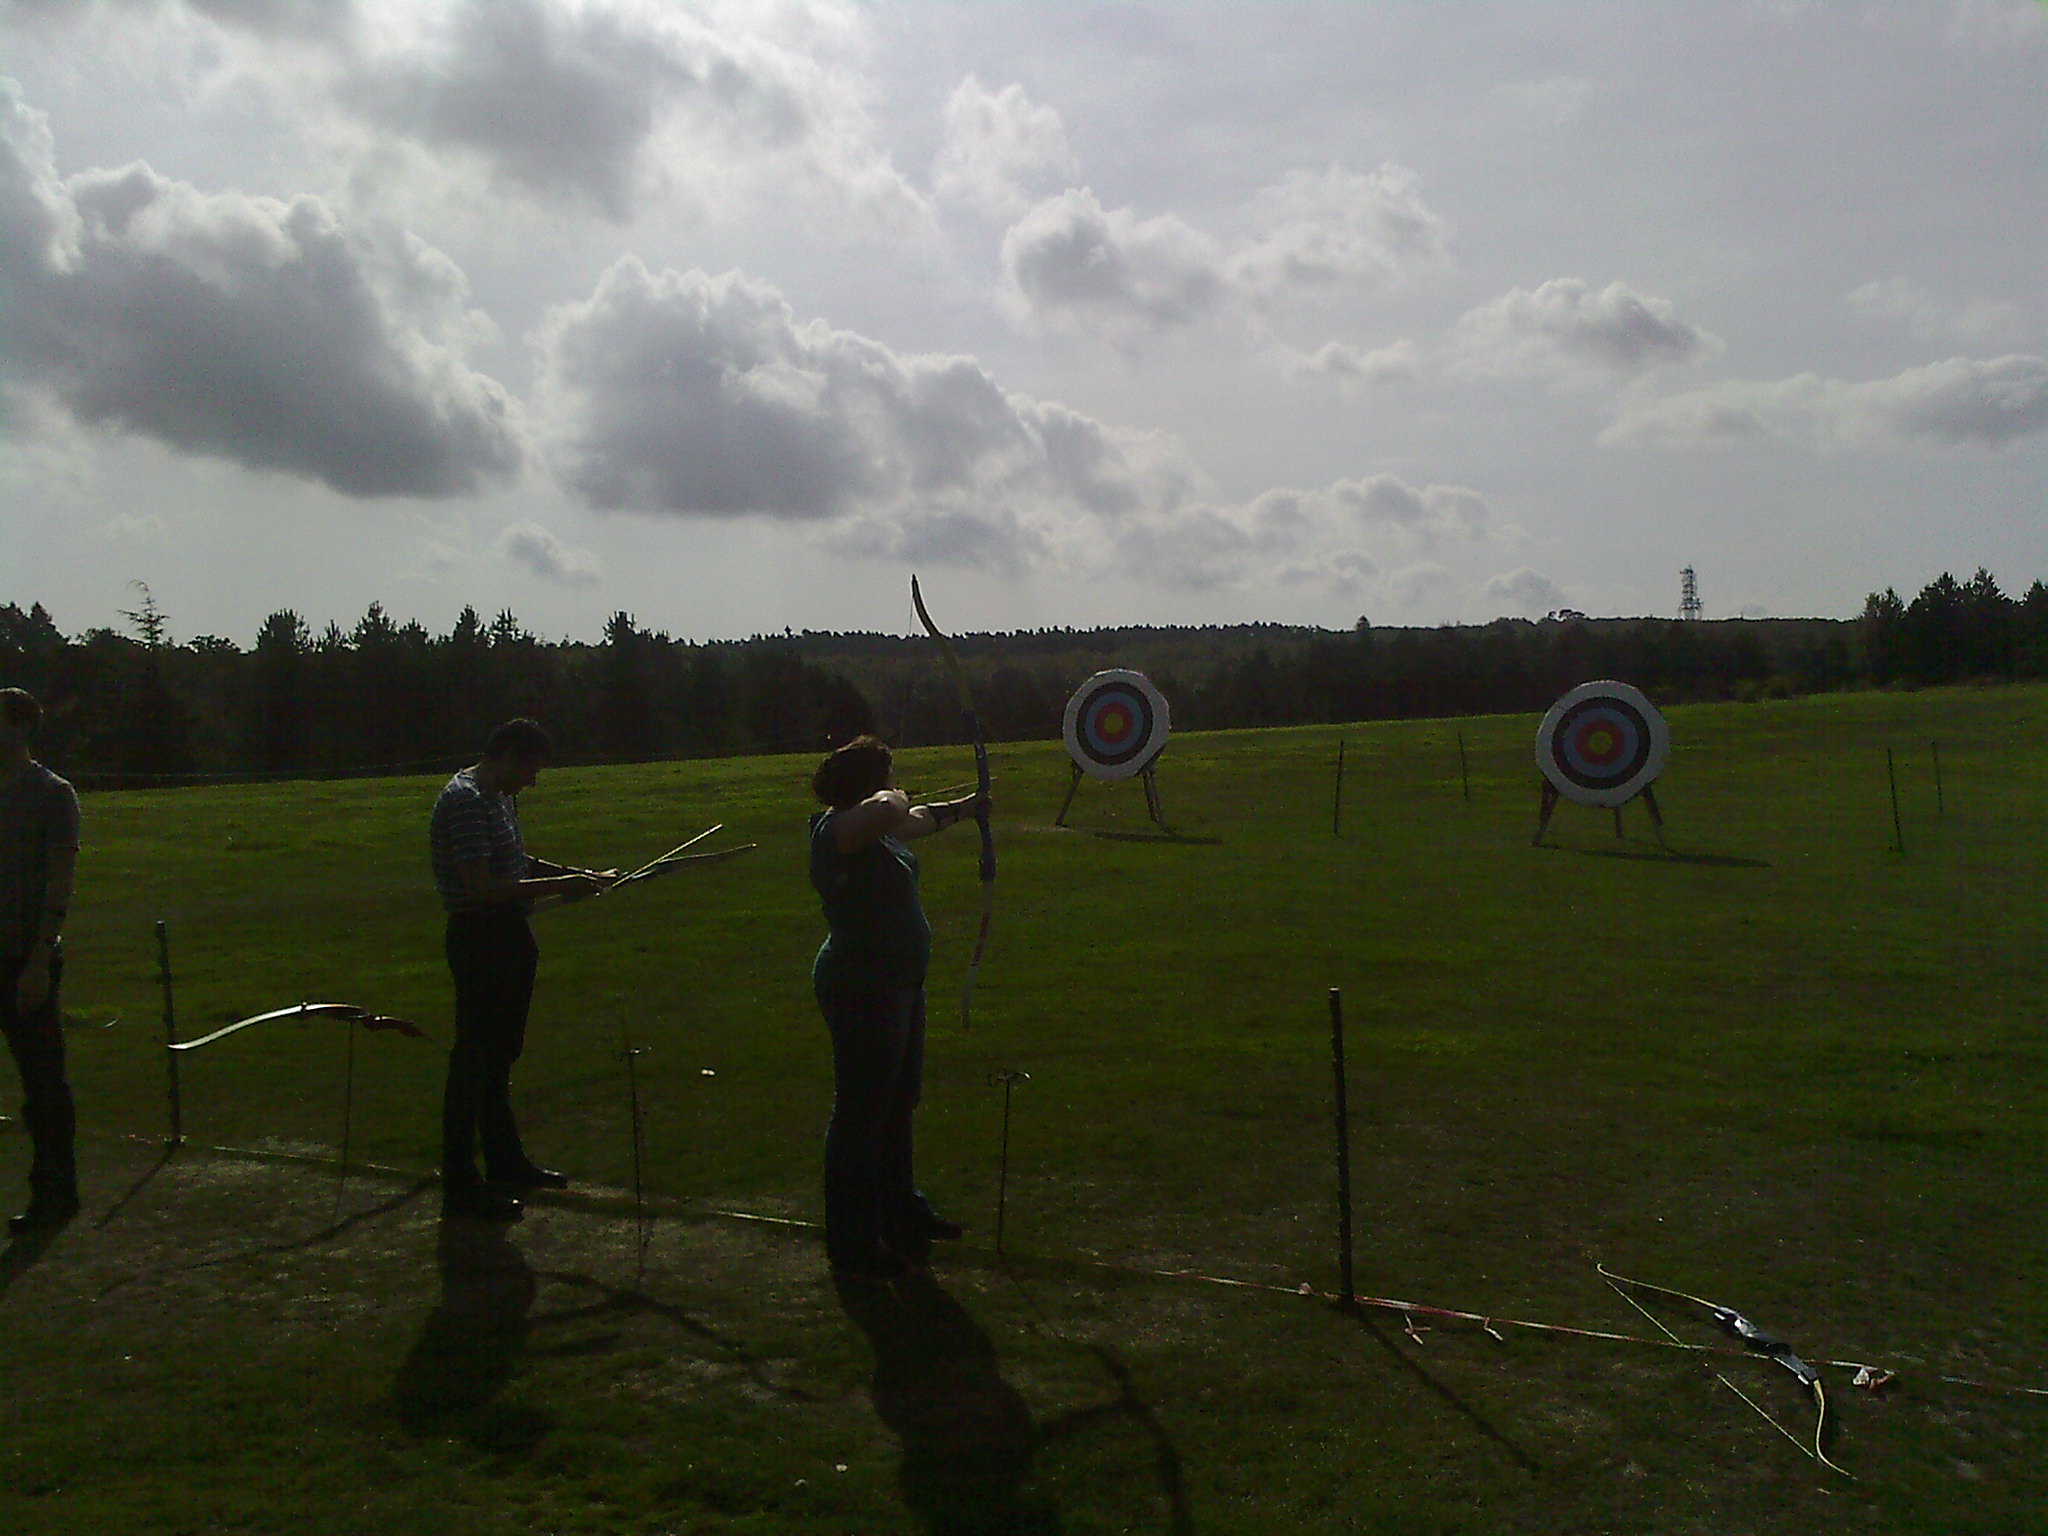 Great weather for Archery!